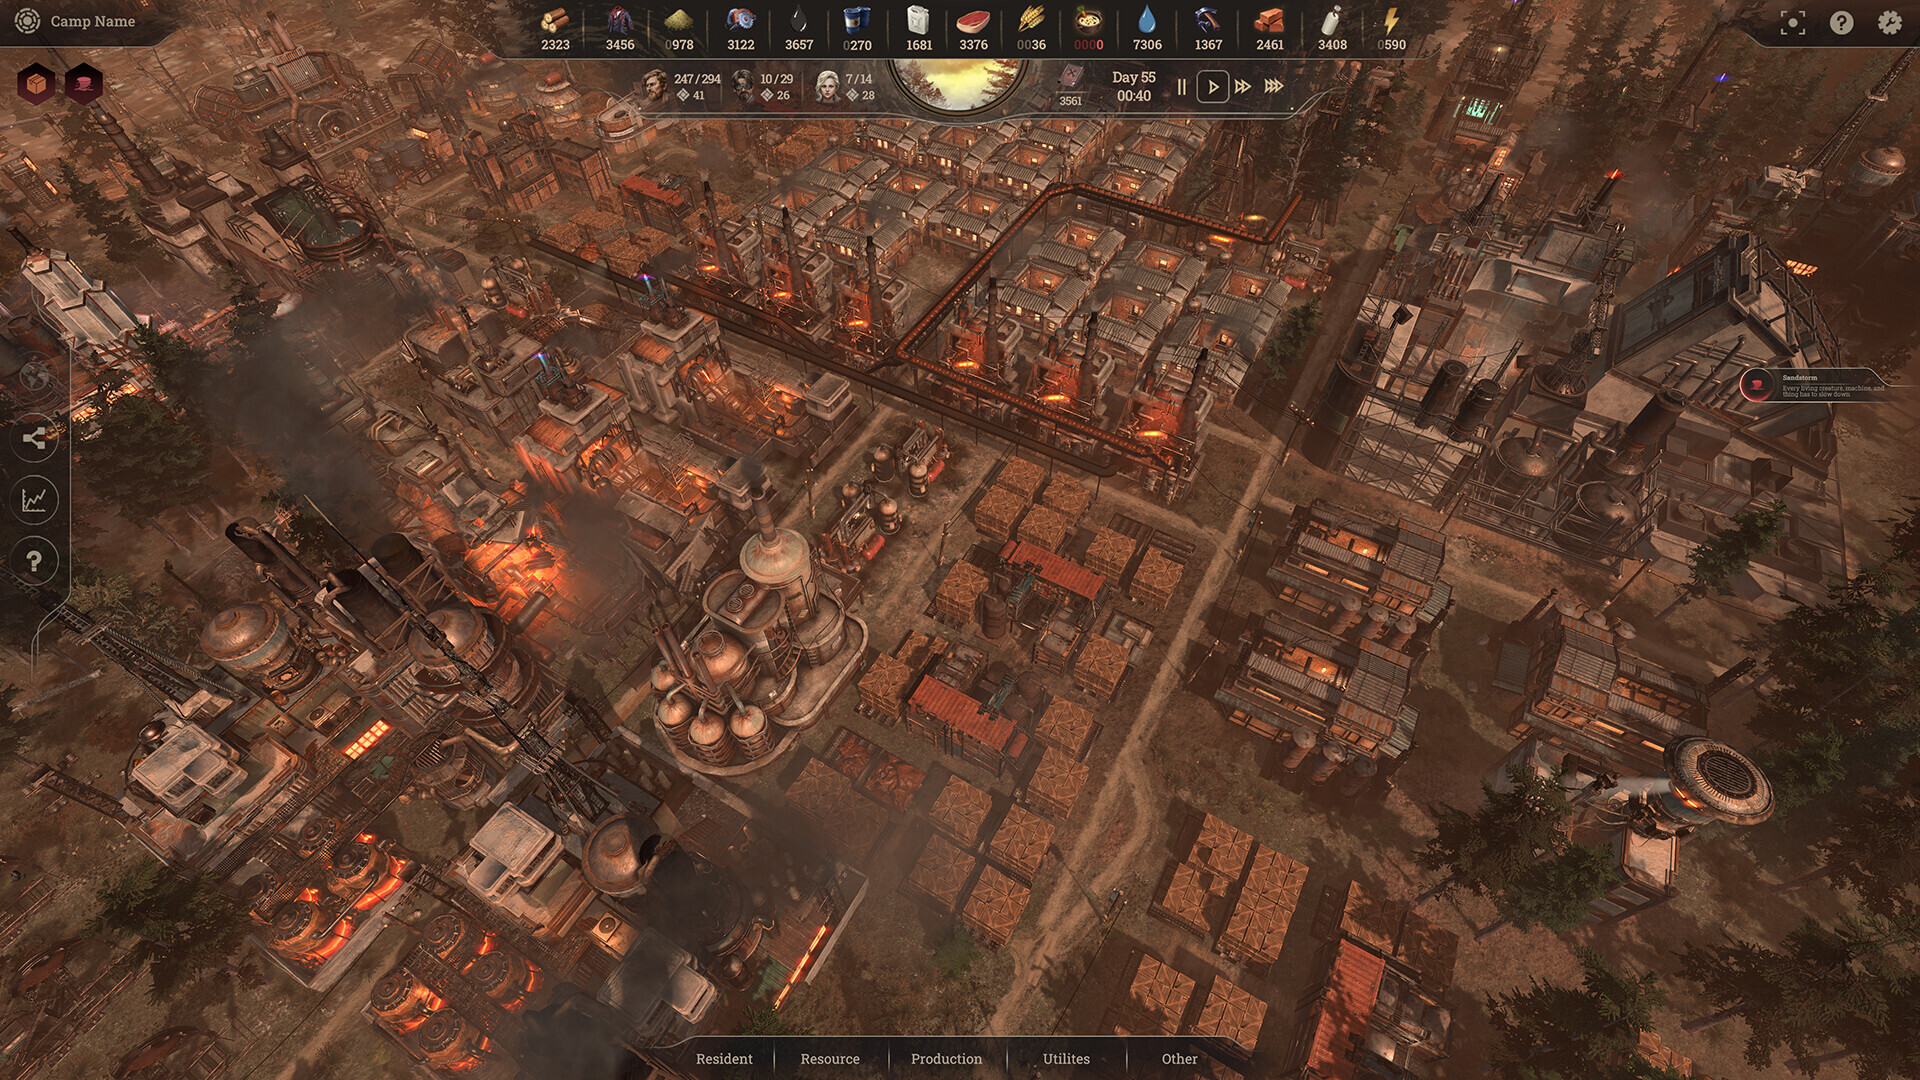 Diesel-powered city builder New Cycle invites you to rekindle hope after a solar flare wrecks the world